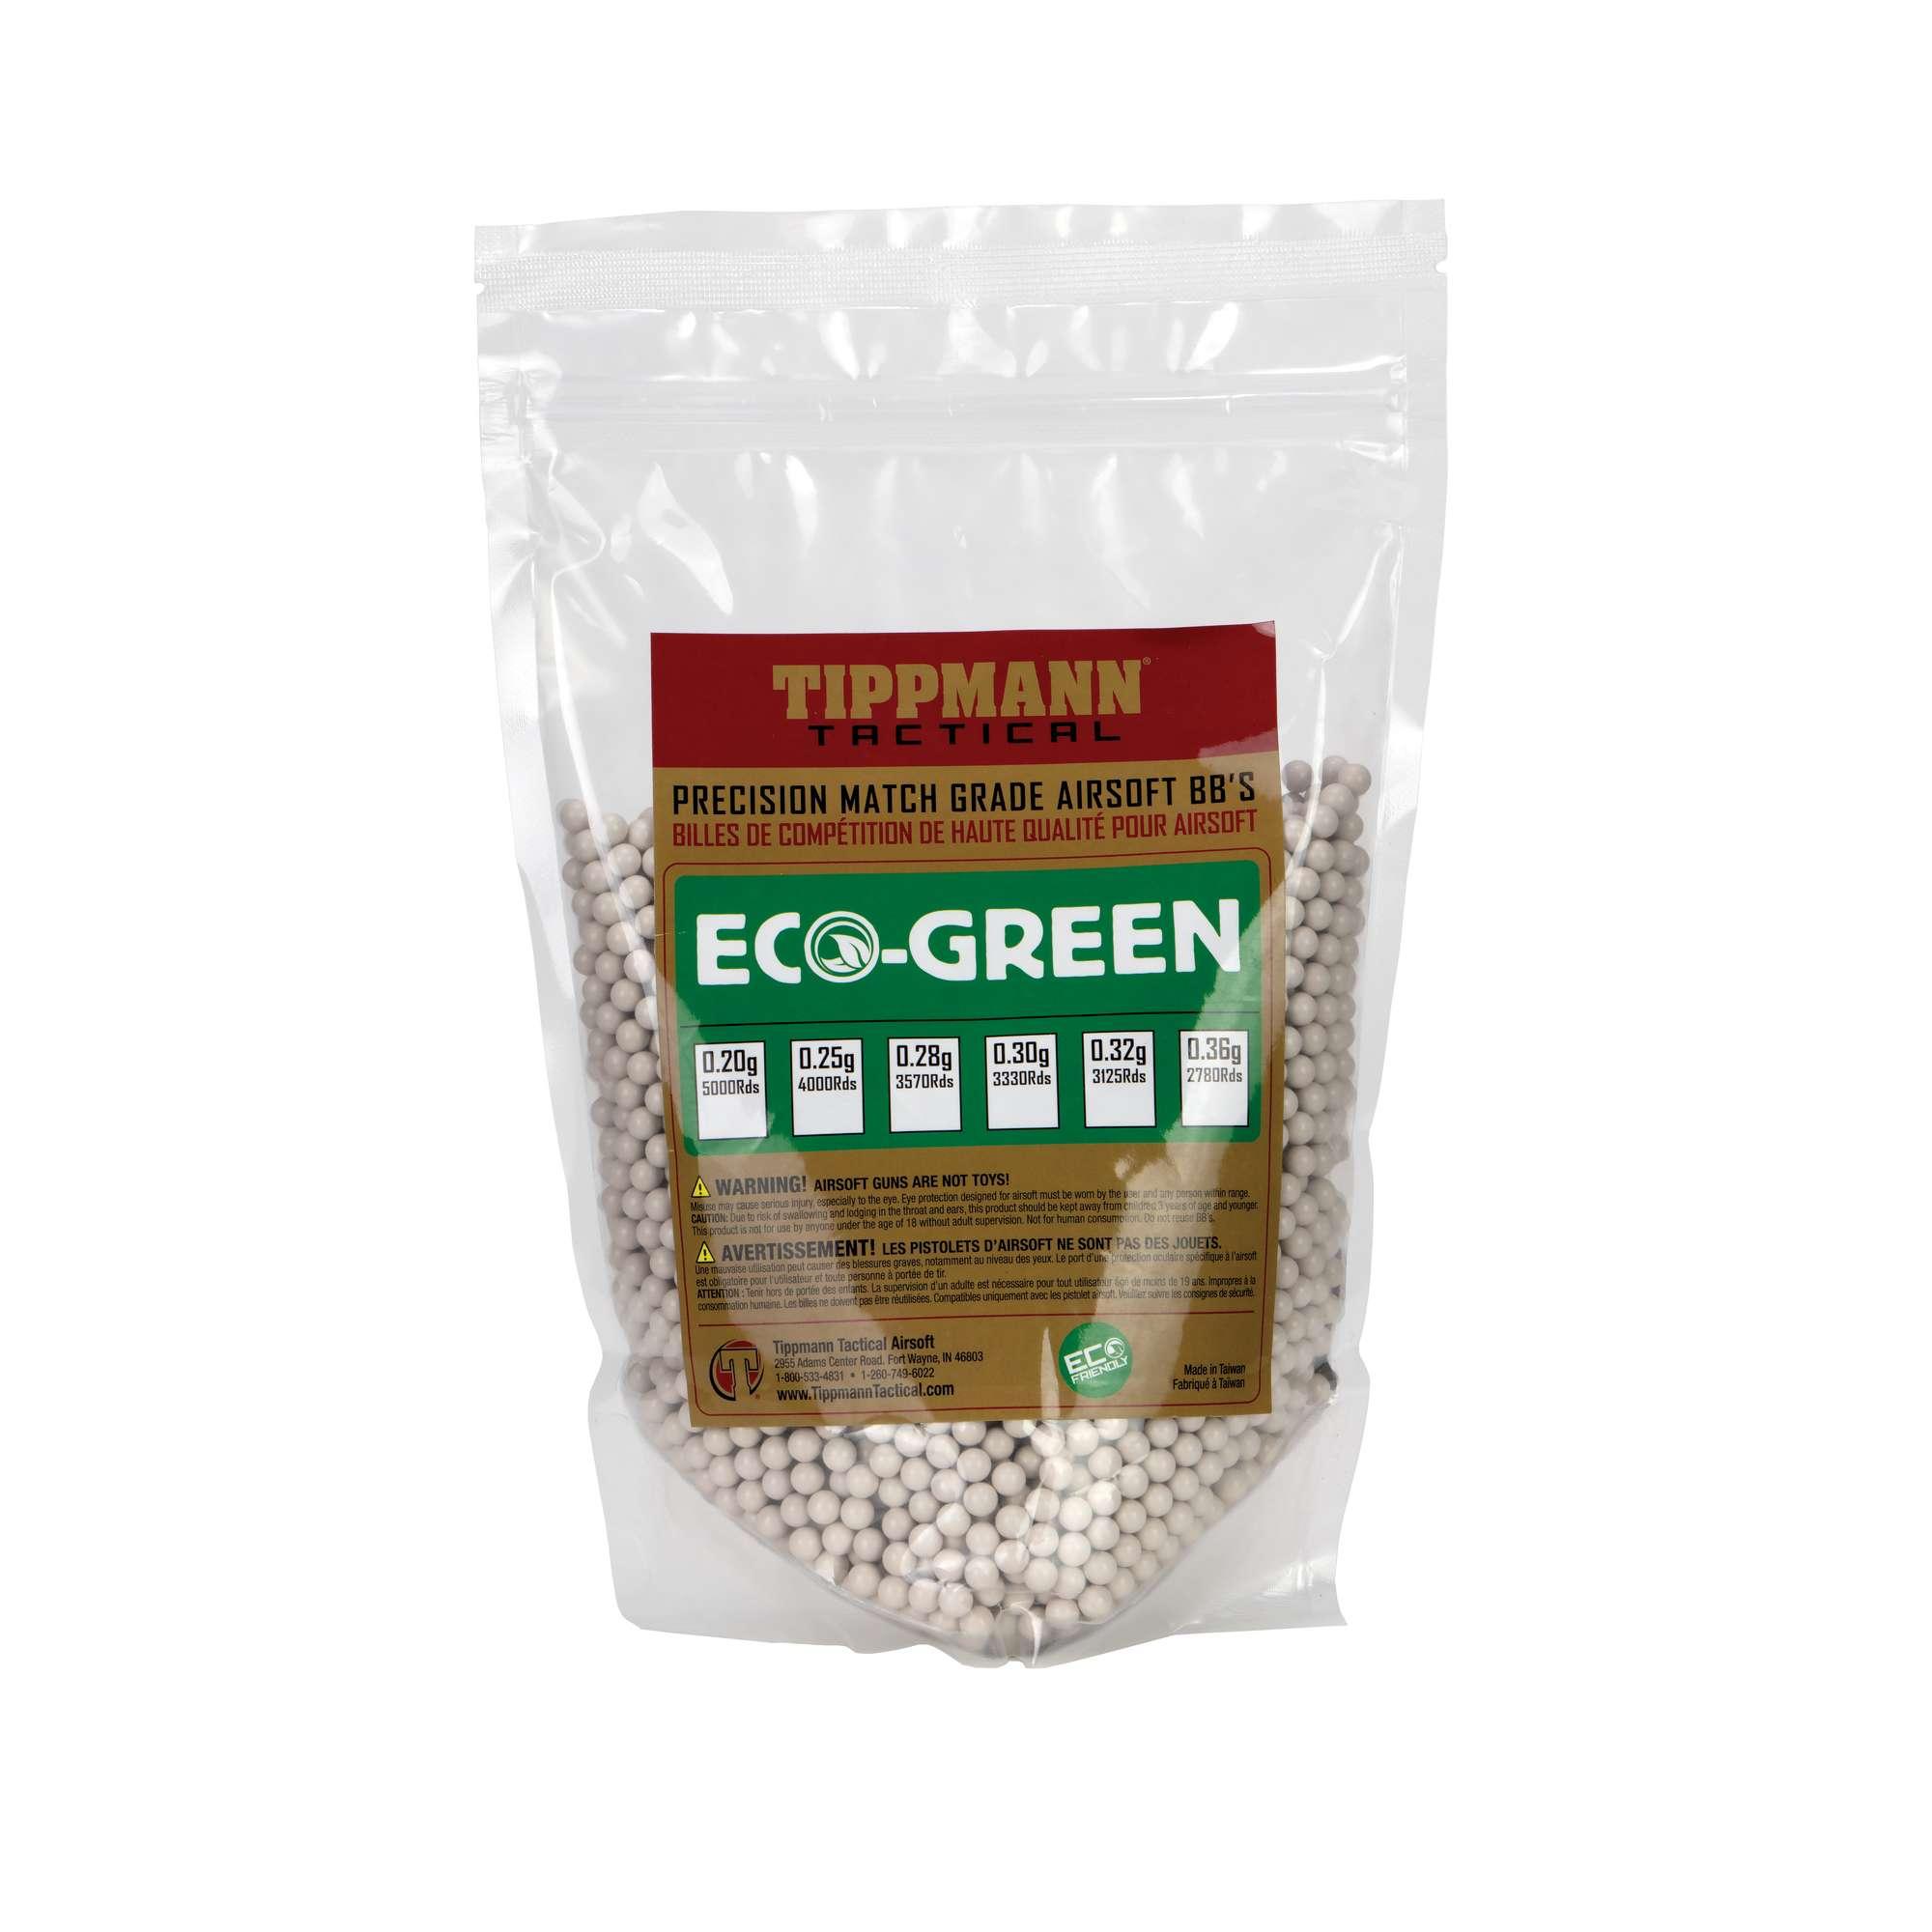 Tippmann Tactical Eco Airsoft Ammo 25g 4,000ct